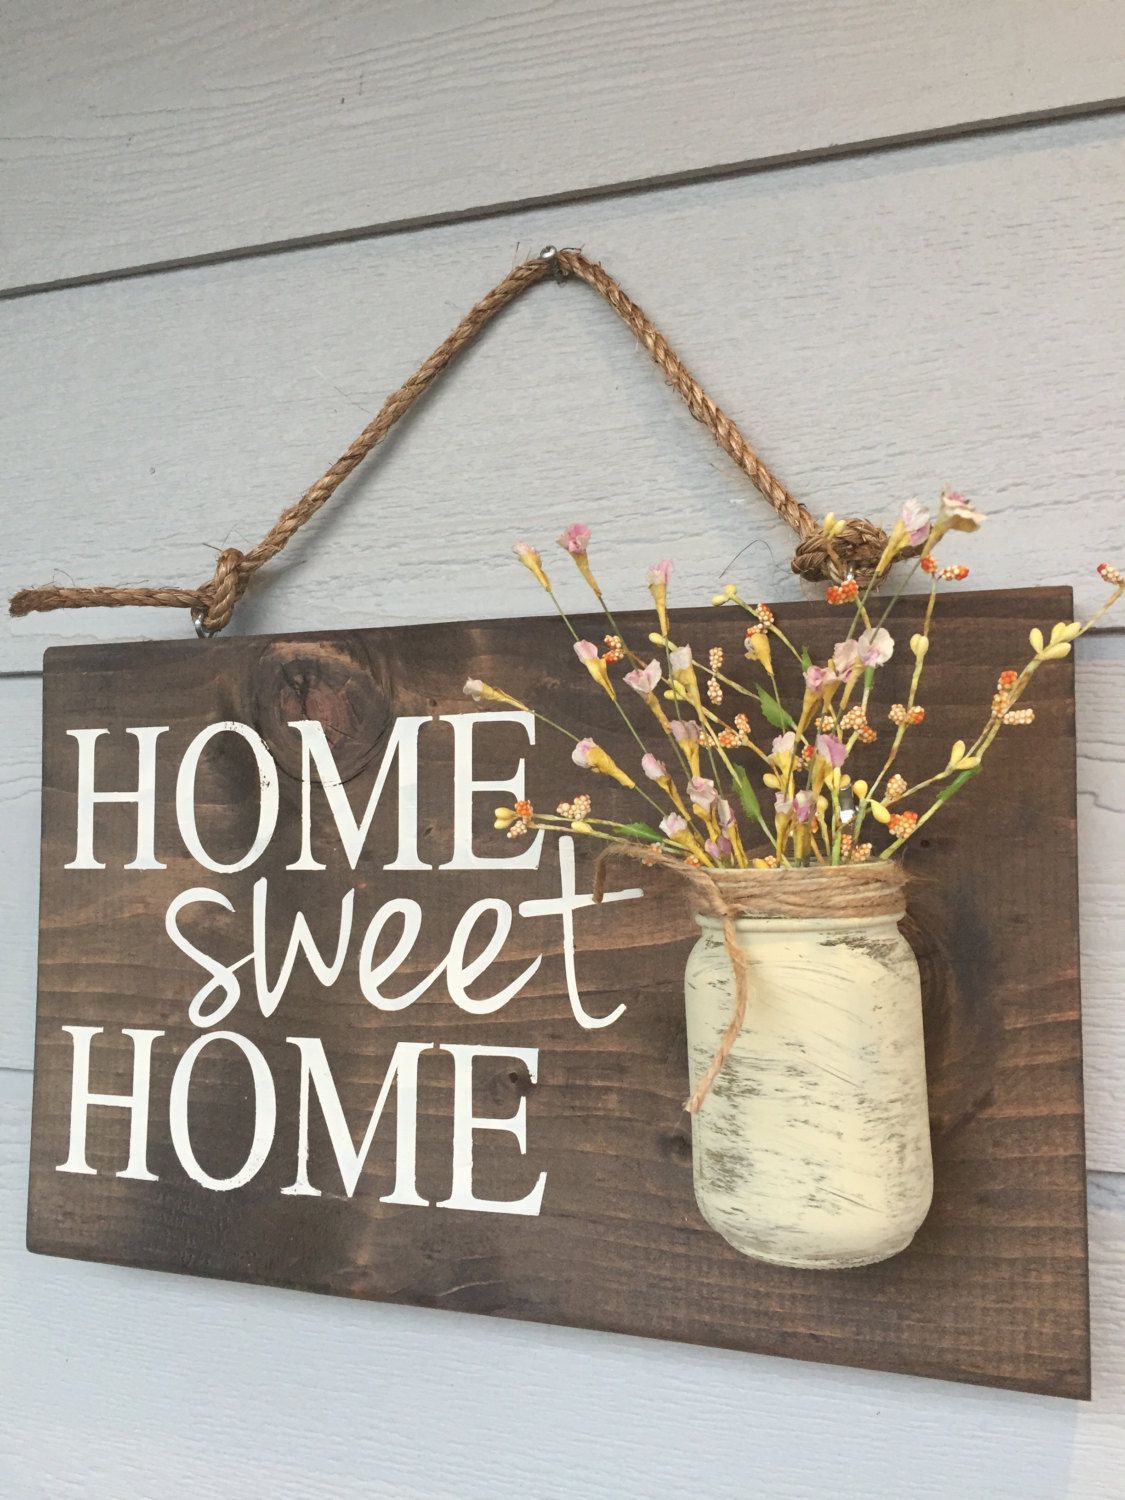 Home sweet home rustic front door sign decor, gift, Outdoor signs for house & home, front porch wood sign decoration, house sign -   23 diy outdoor signs
 ideas